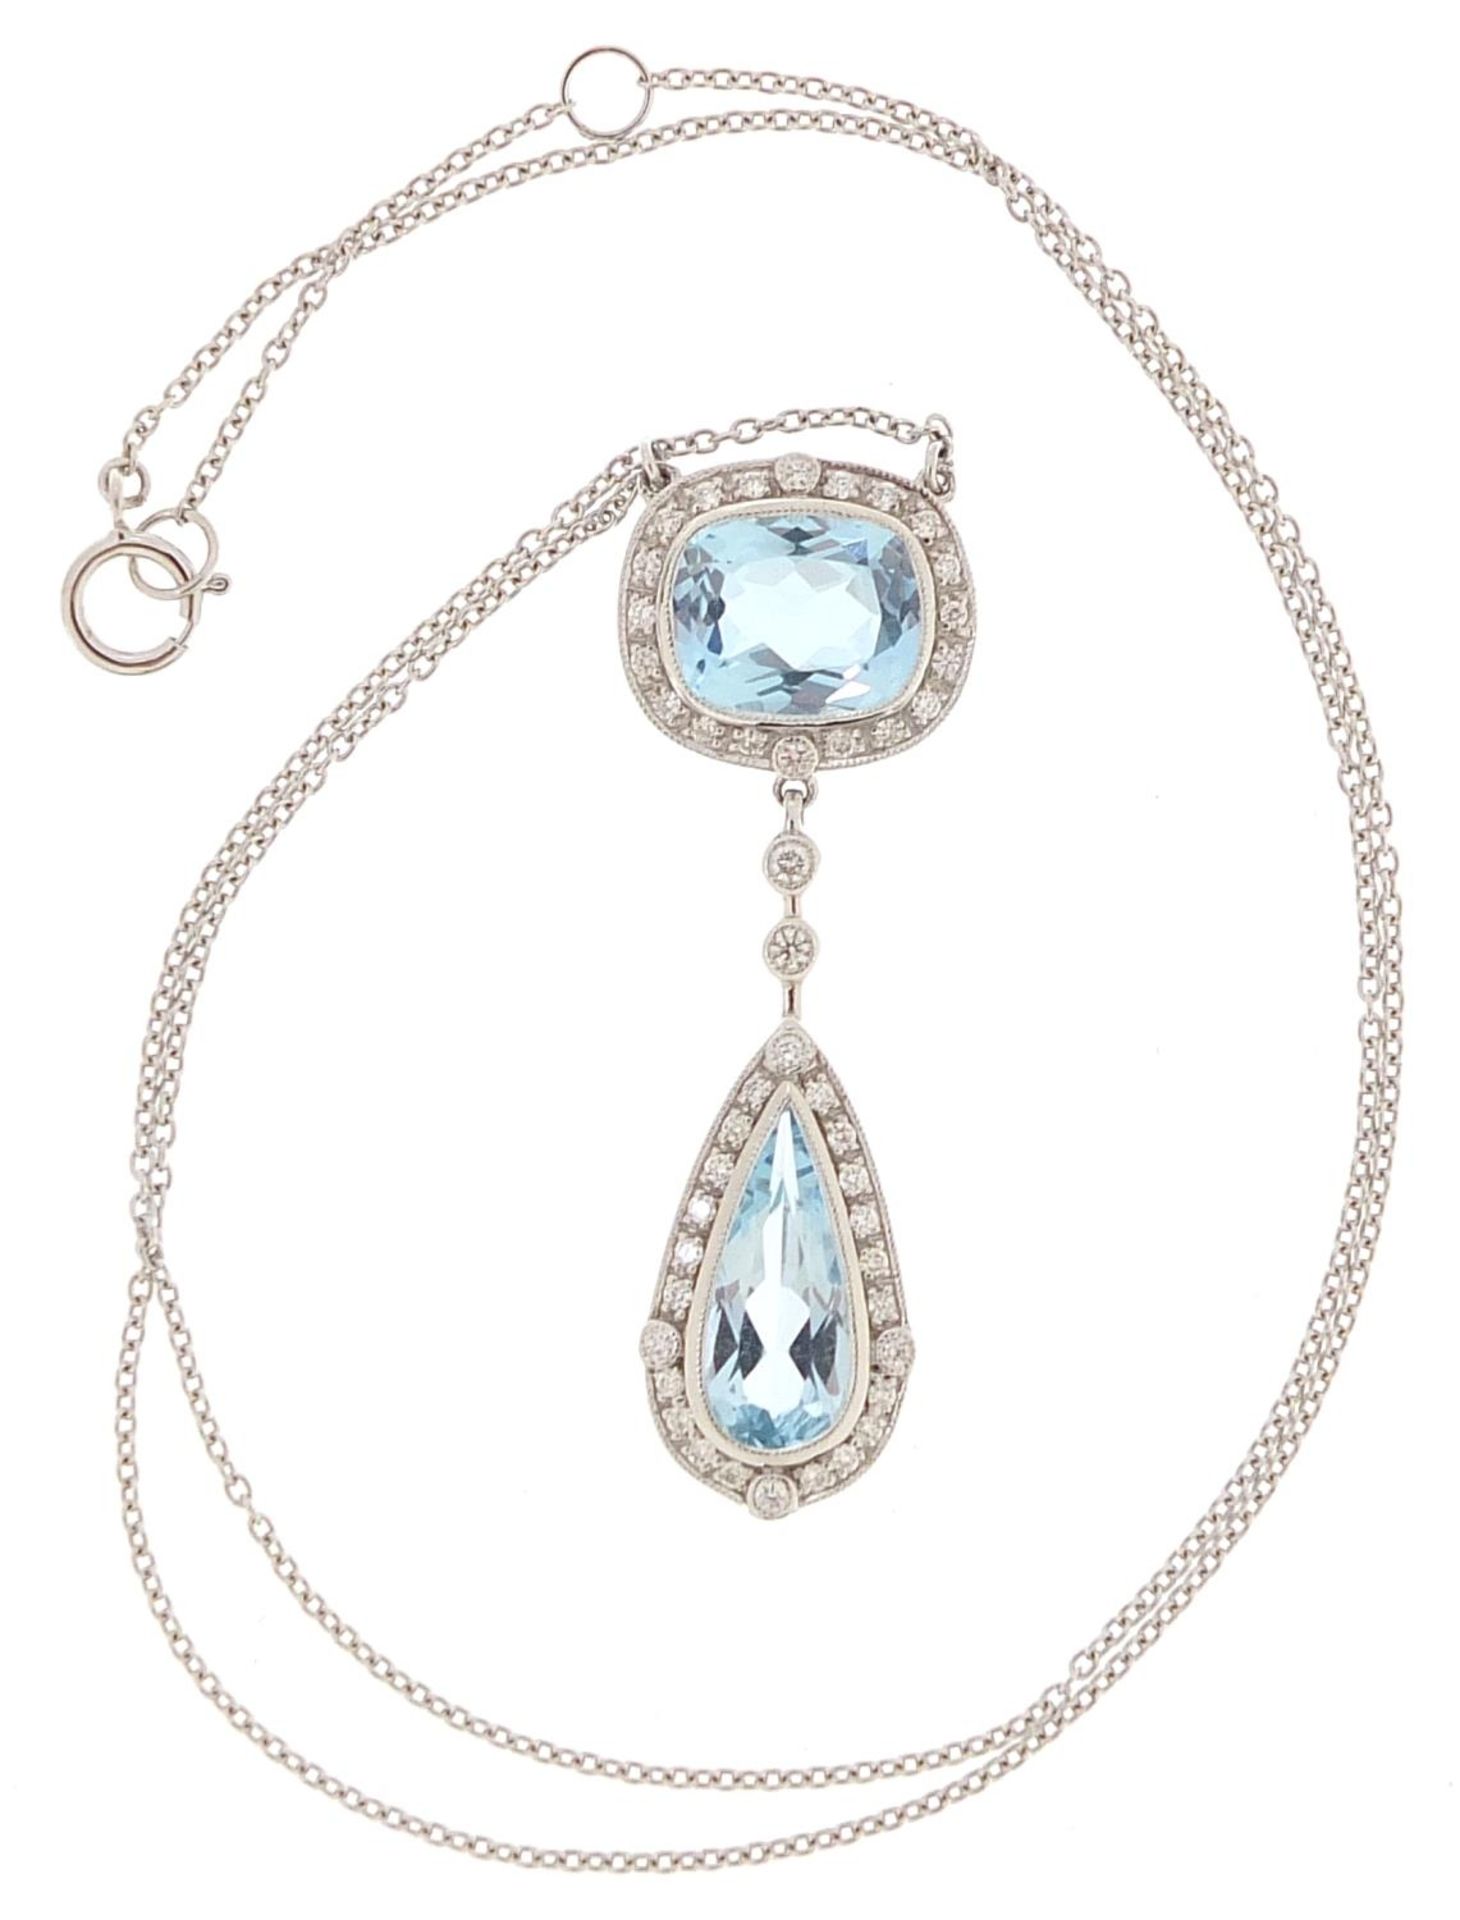 Art Deco style 18ct white gold blue topaz and diamond necklace, total topaz weight approximately 5. - Image 2 of 6